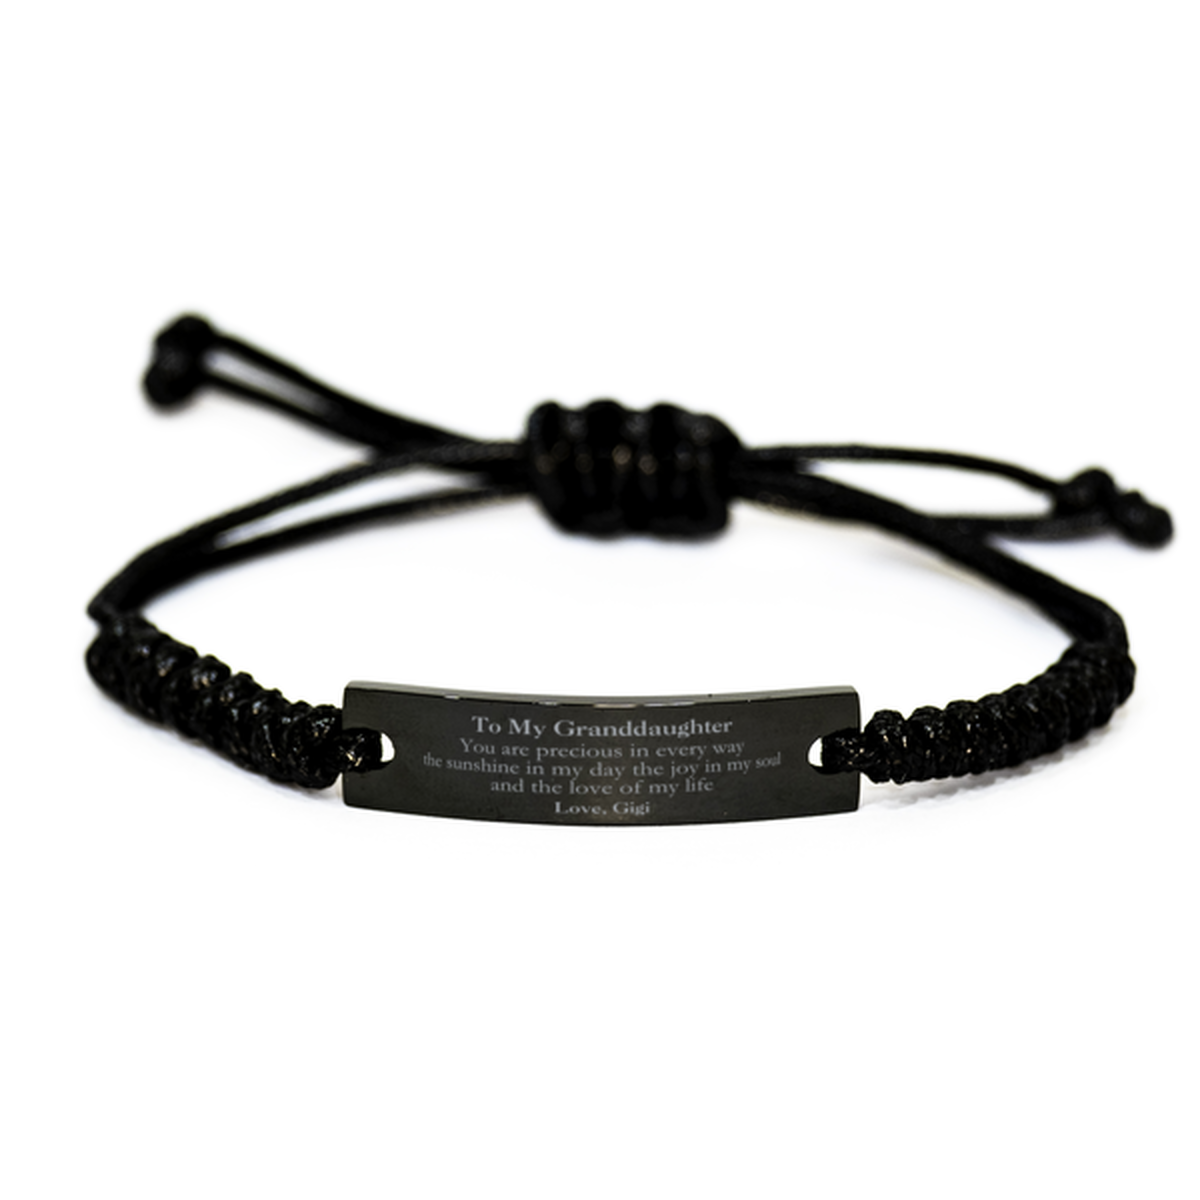 Graduation Gifts for Granddaughter Black Rope Bracelet Present from Gigi, Christmas Granddaughter Birthday Gifts Granddaughter You are precious in every way the sunshine in my day. Love, Gigi